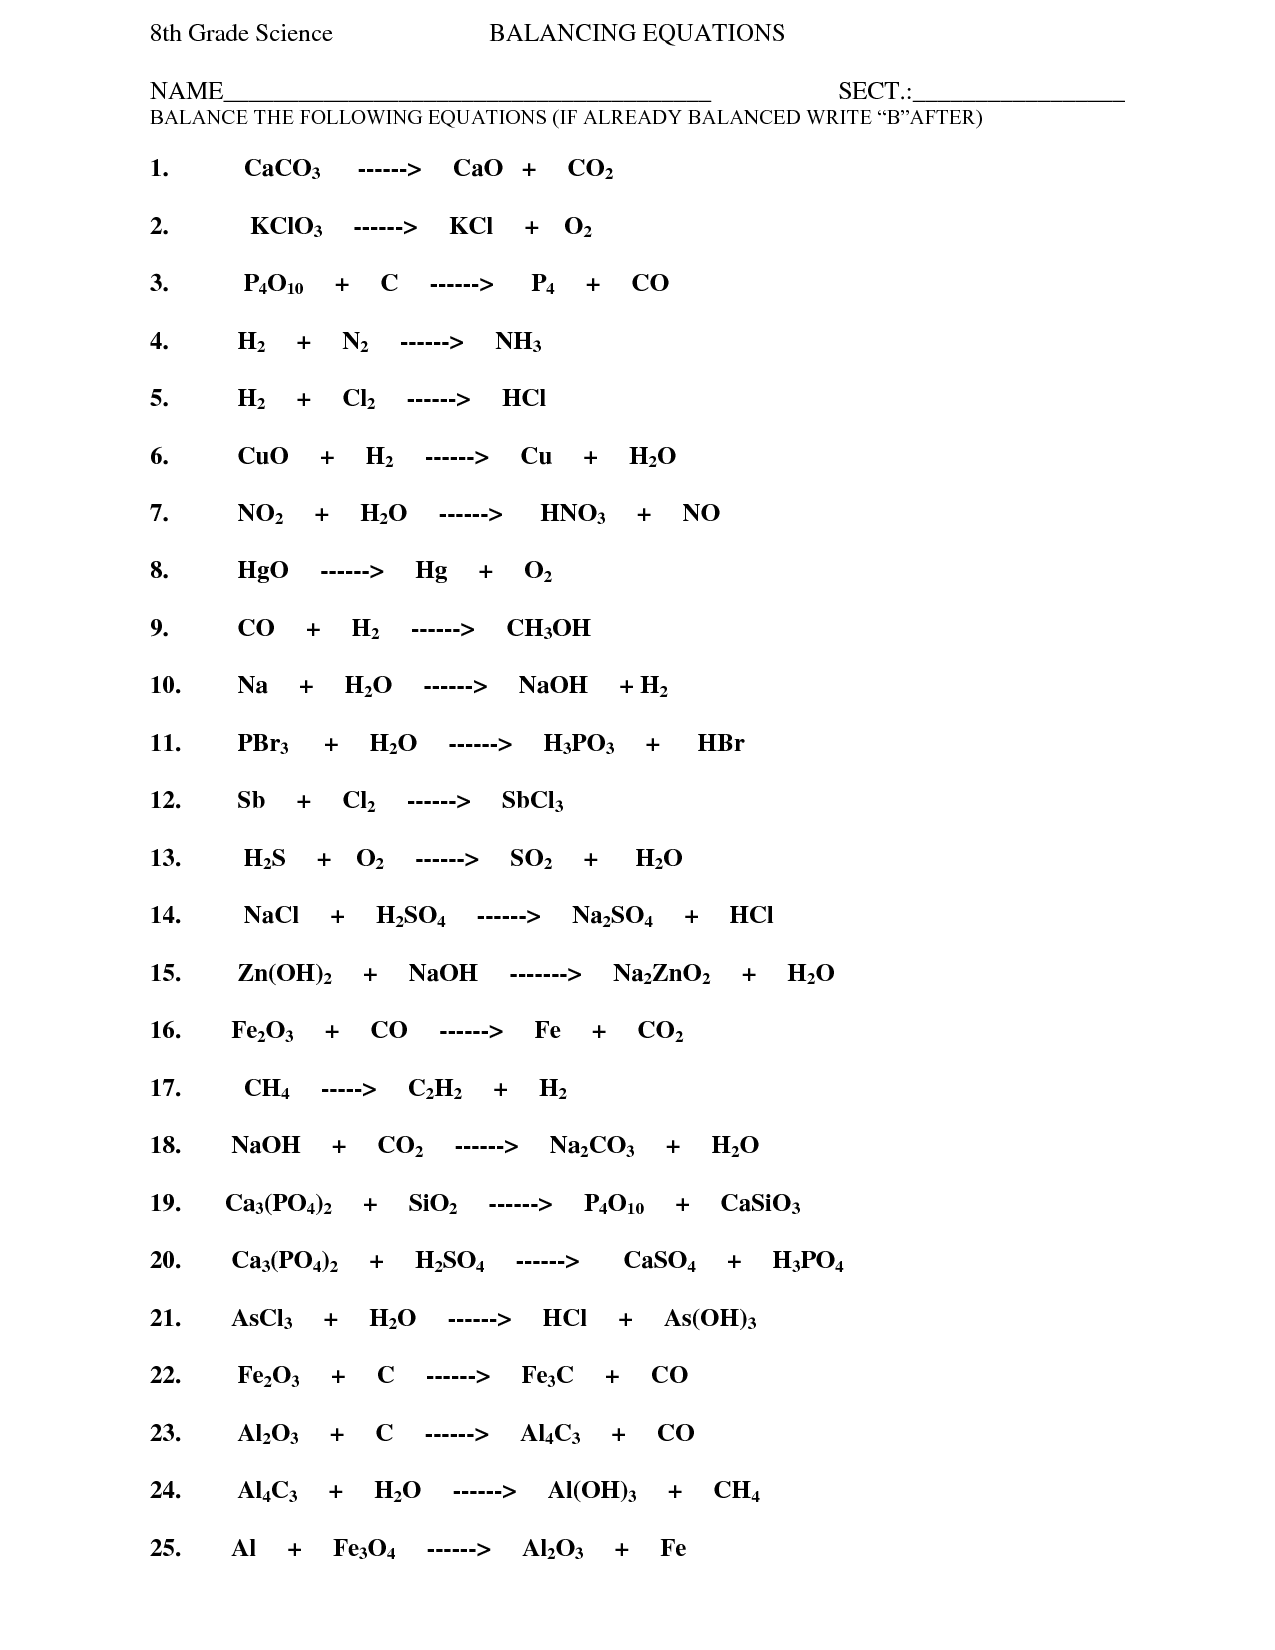 6 Best Images of Balancing Chemical Equations Worksheet Easy  Balancing Chemical Equations 